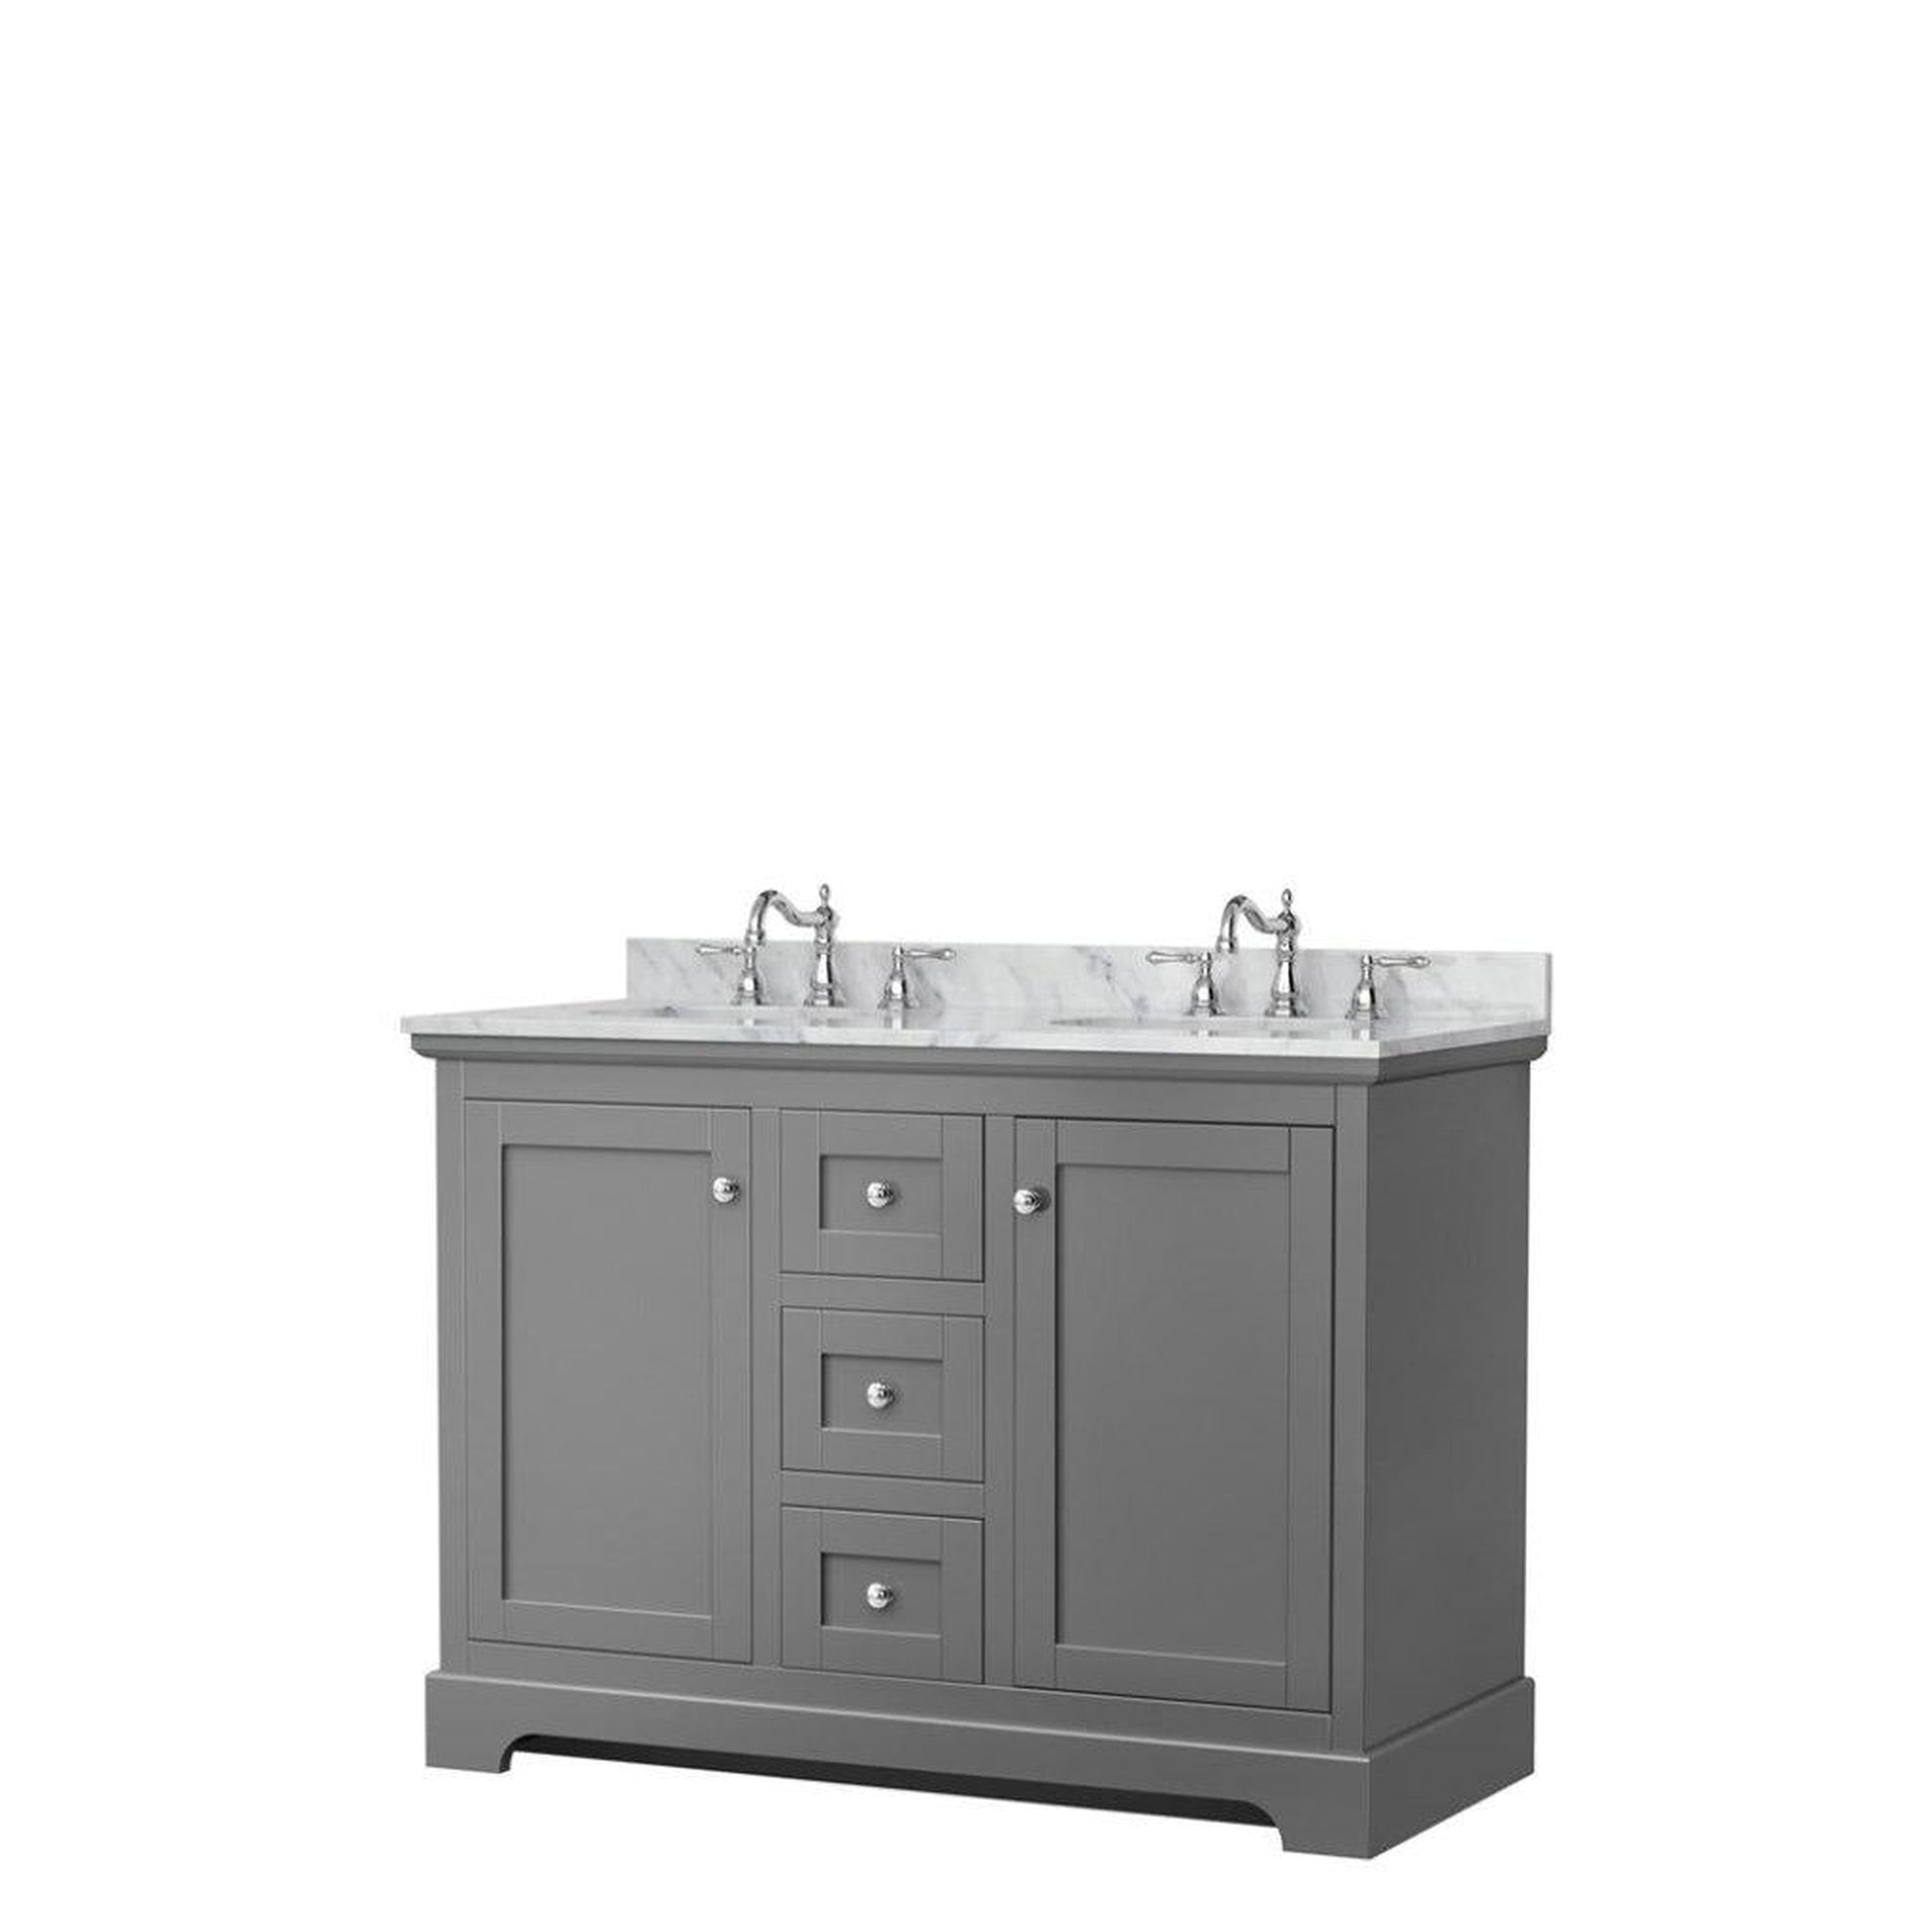 Wyndham Collection Avery 48" Dark Gray Double Bathroom Vanity With White Carrara Marble Countertop With 3-Hole Faucet And 8" Oval Sink